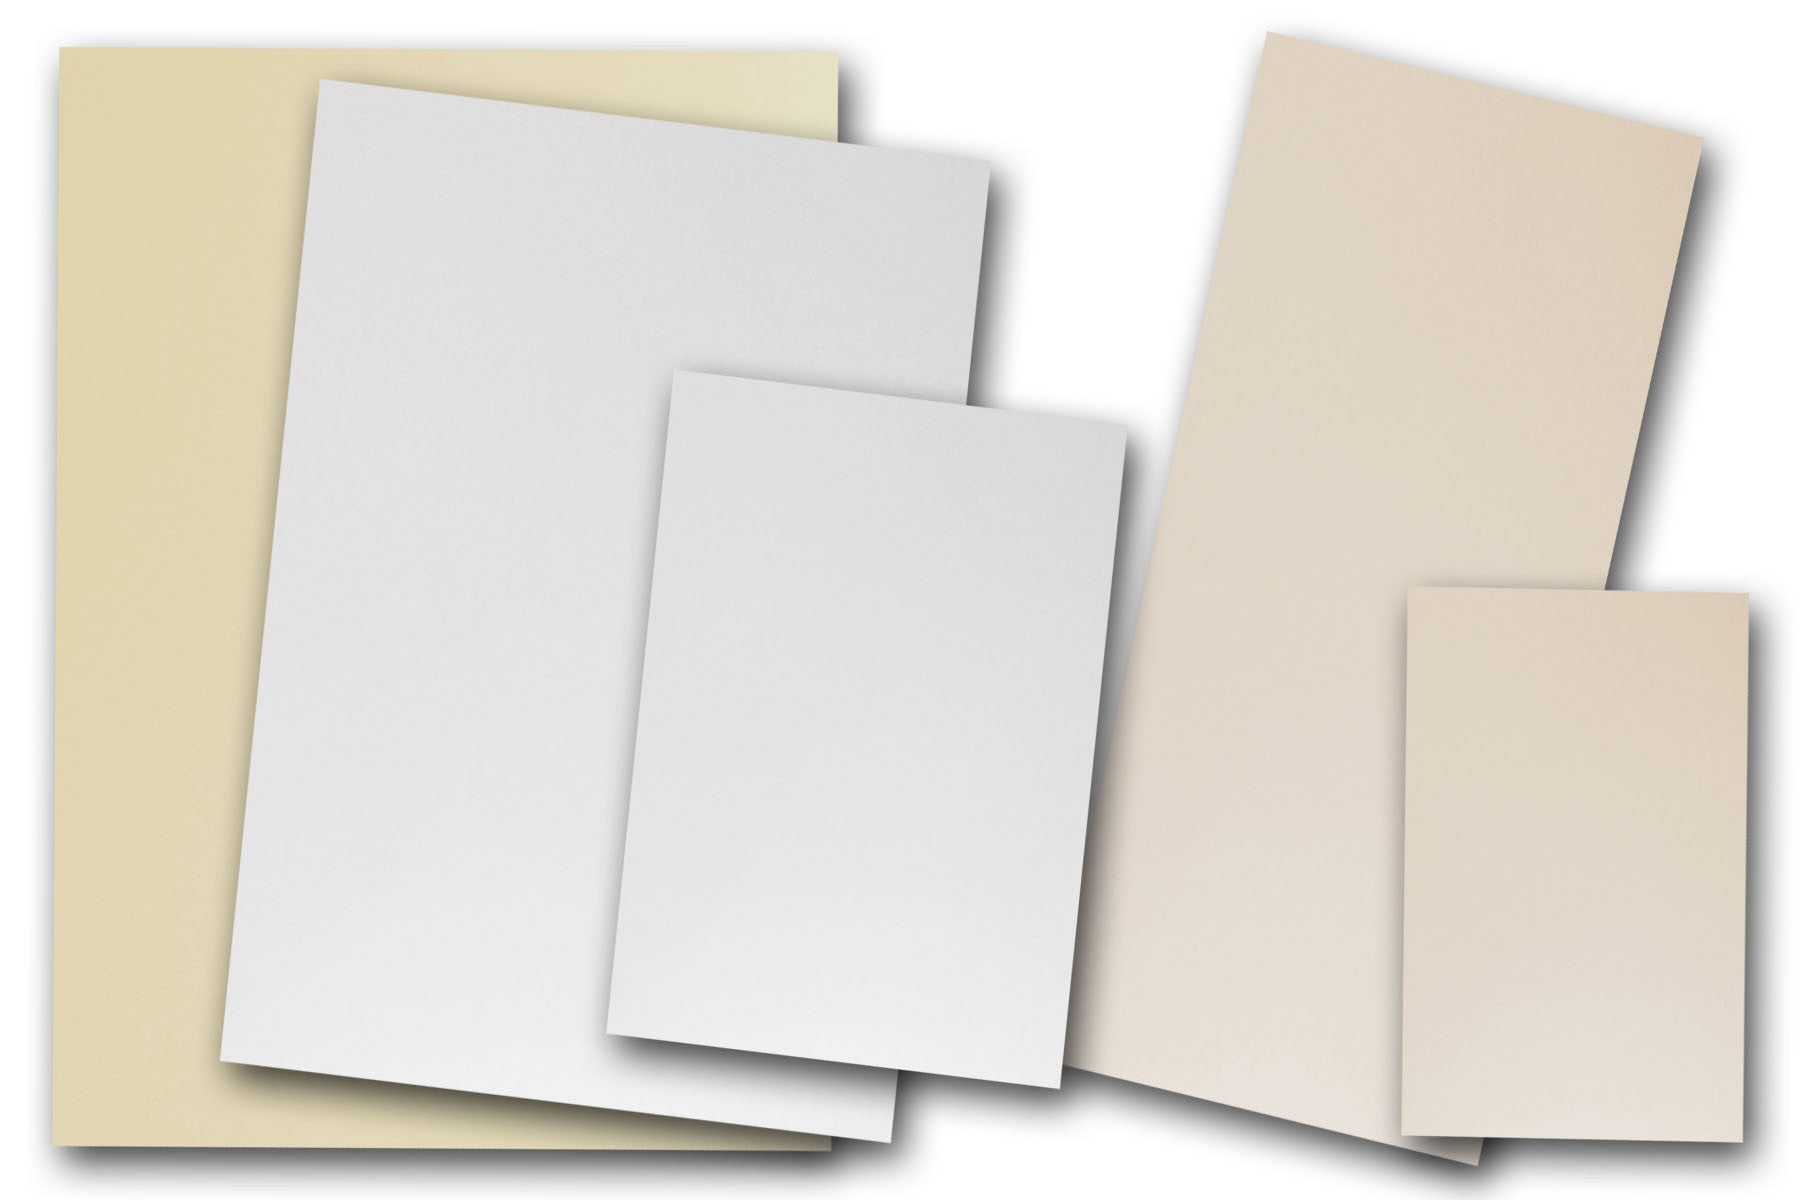 100 Sheets of White Card Stock Paper - 80 lb. Paperweight Cover - 8.5 x 11  Paper